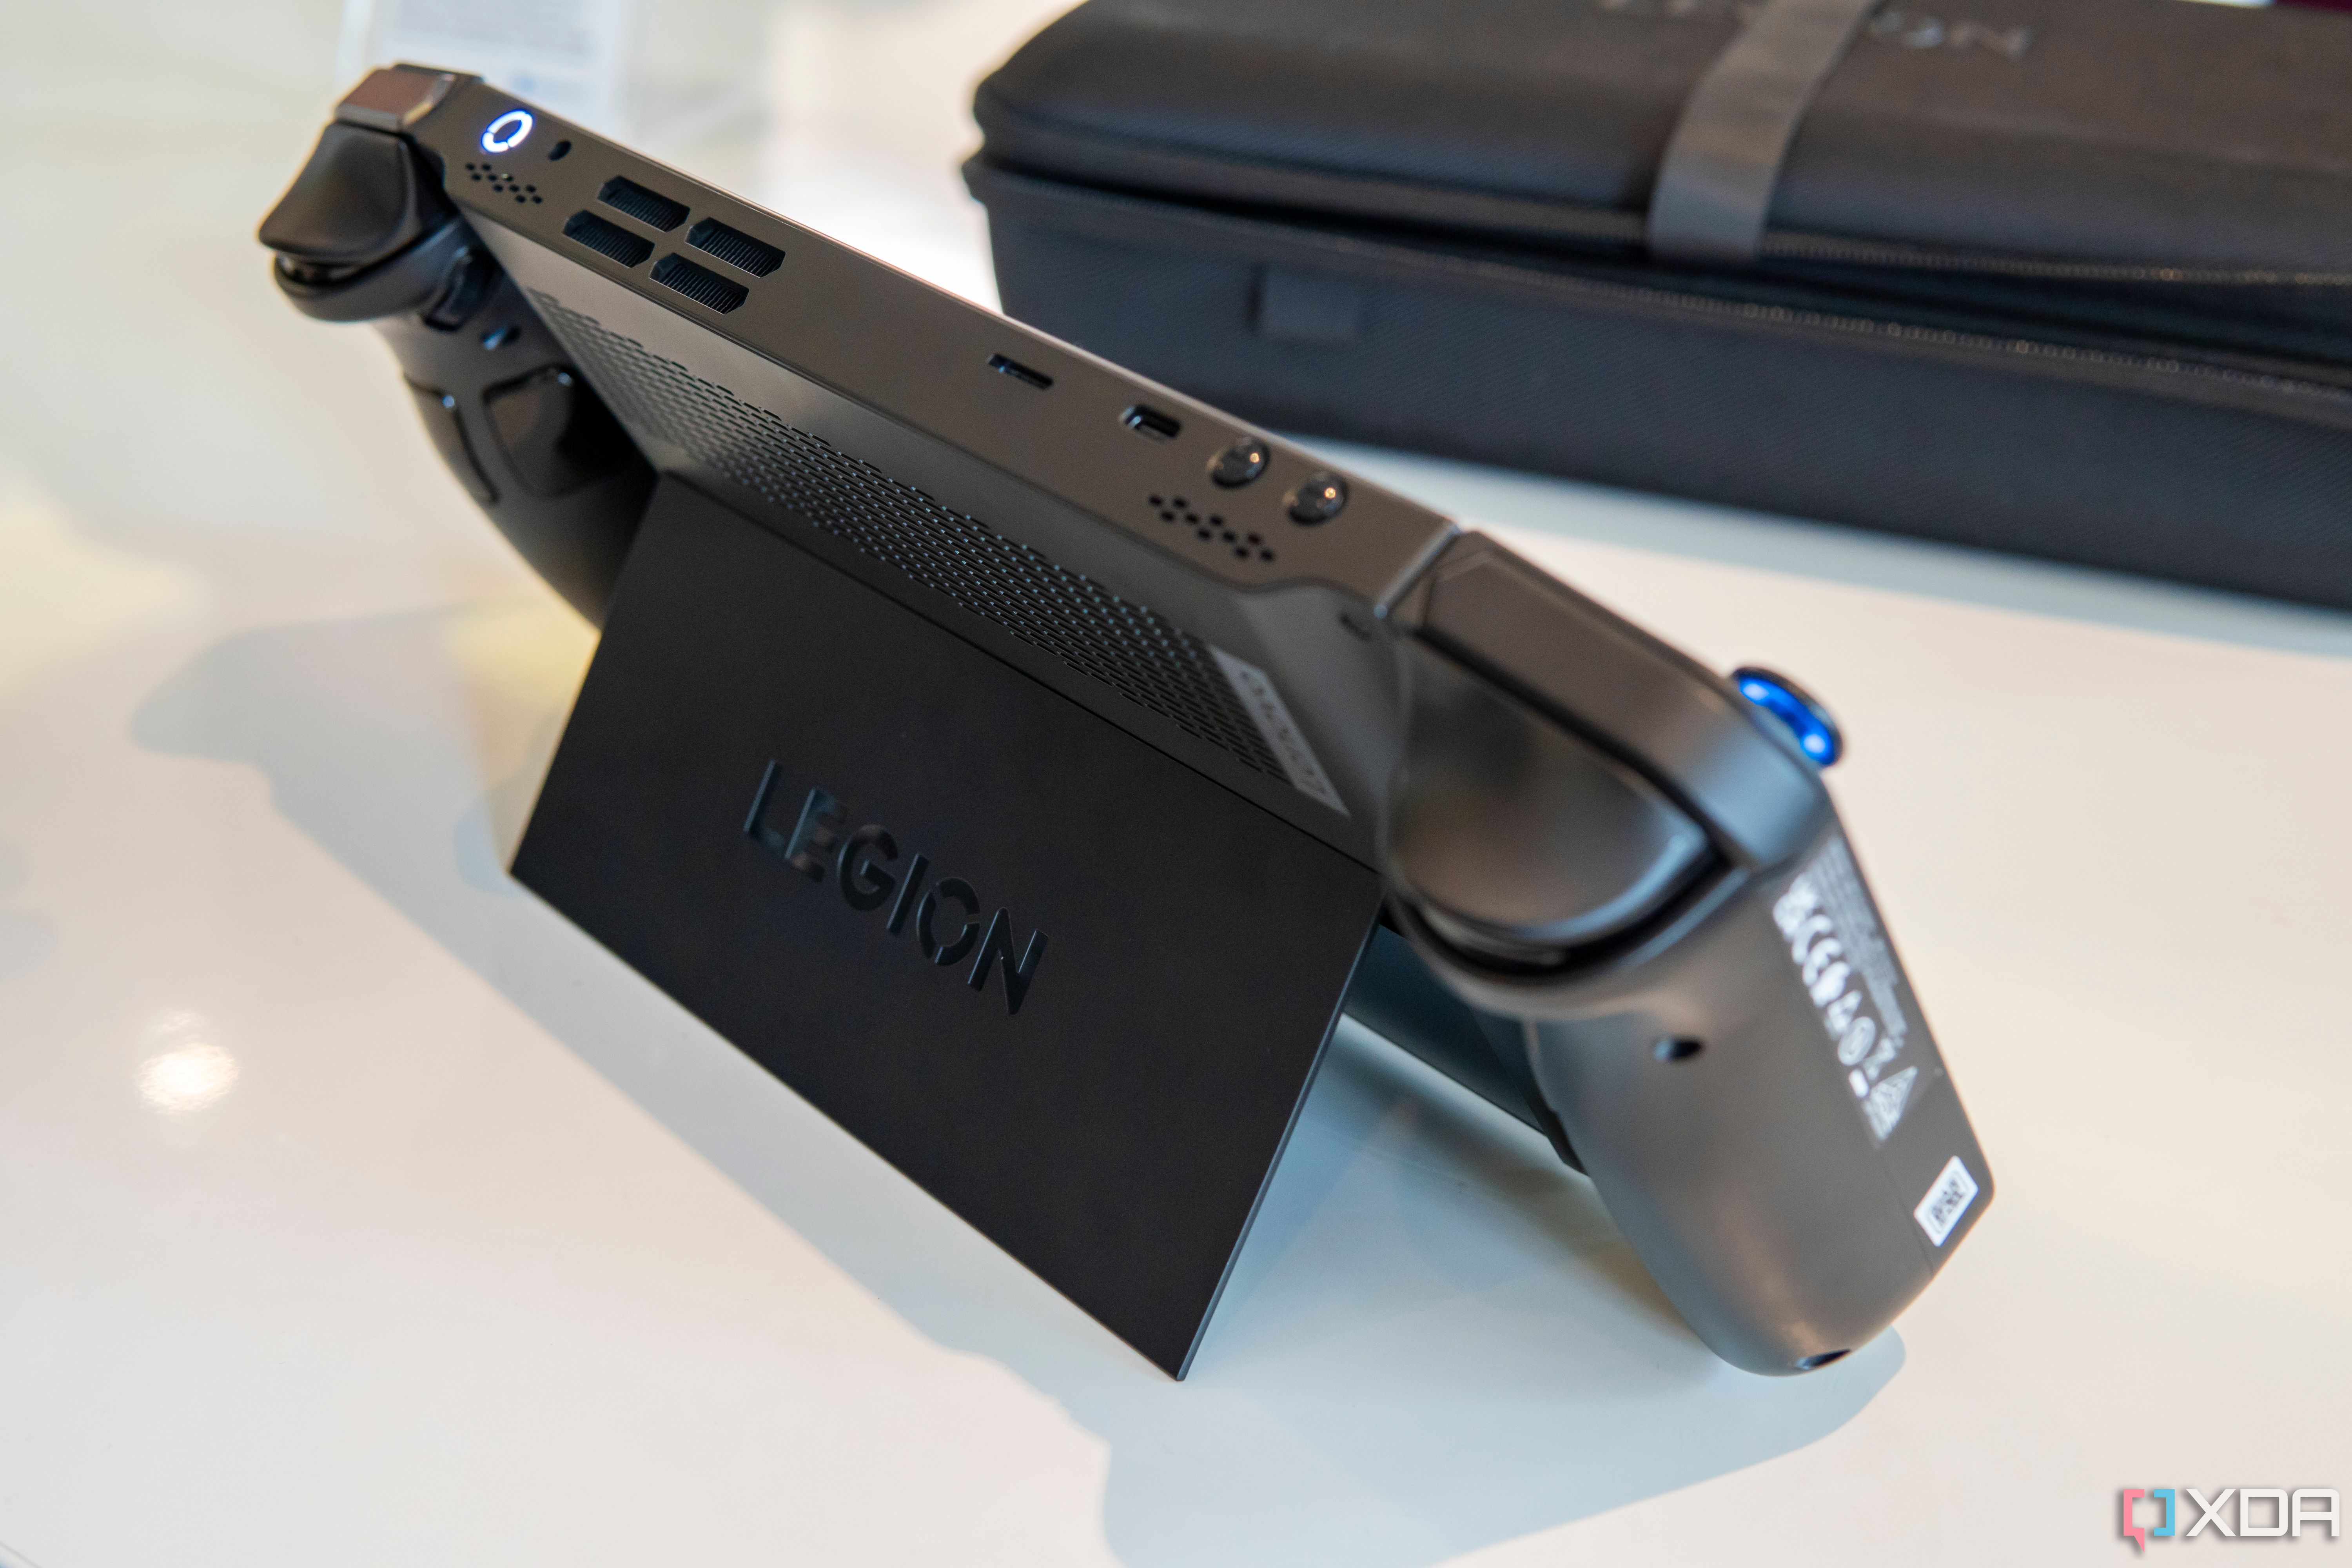 Angled rear view of the Lenovo legion Go with the kickstand deployed